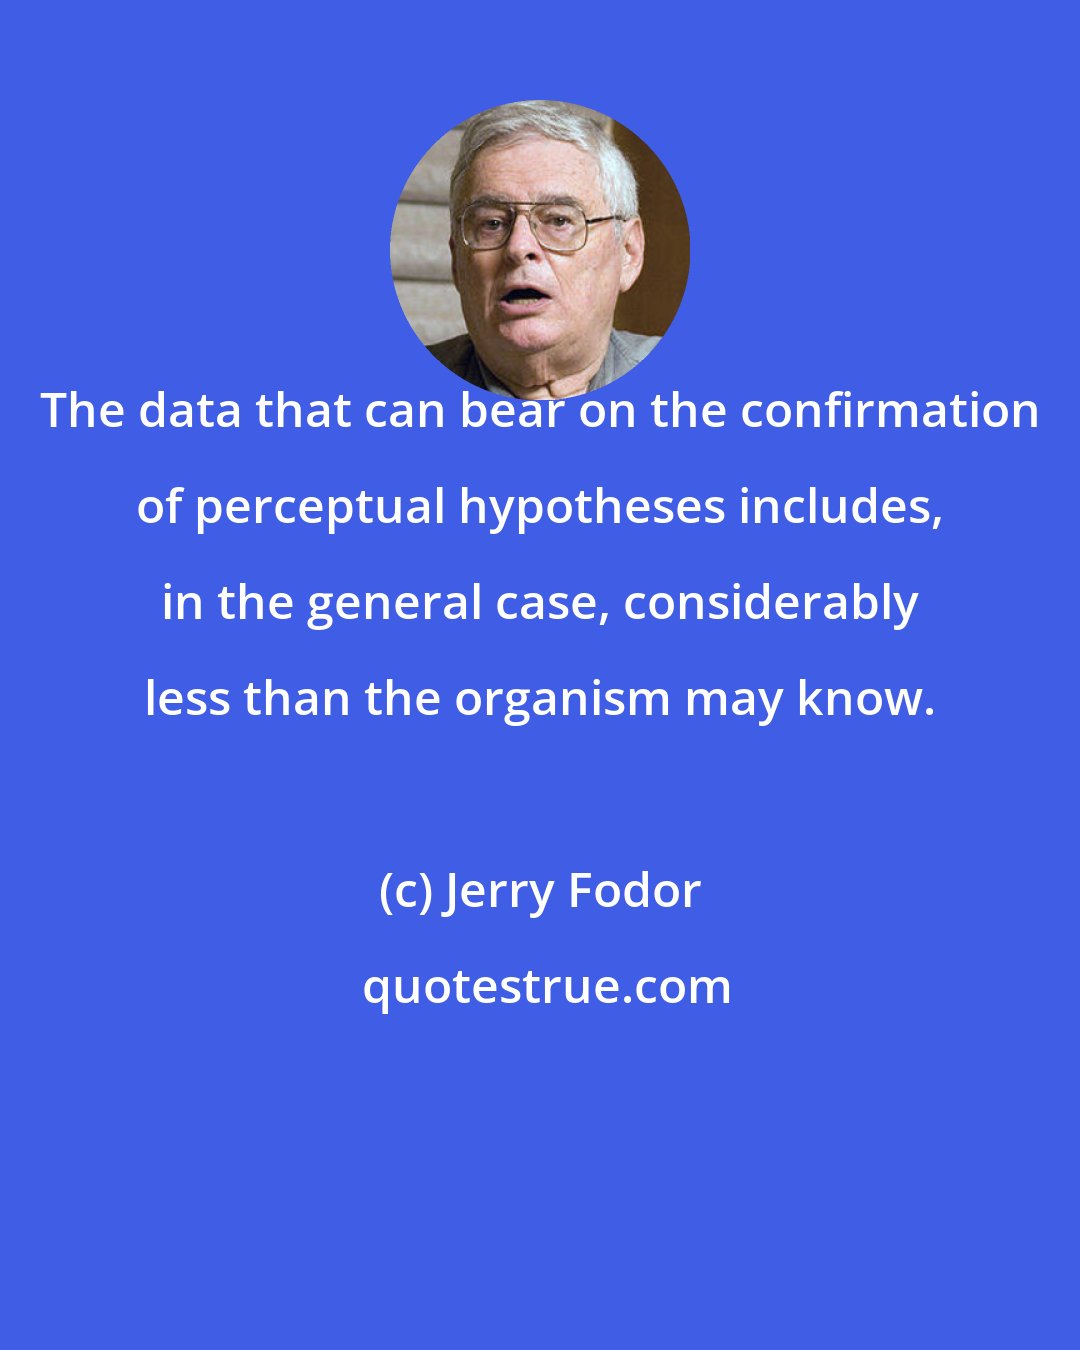 Jerry Fodor: The data that can bear on the confirmation of perceptual hypotheses includes, in the general case, considerably less than the organism may know.